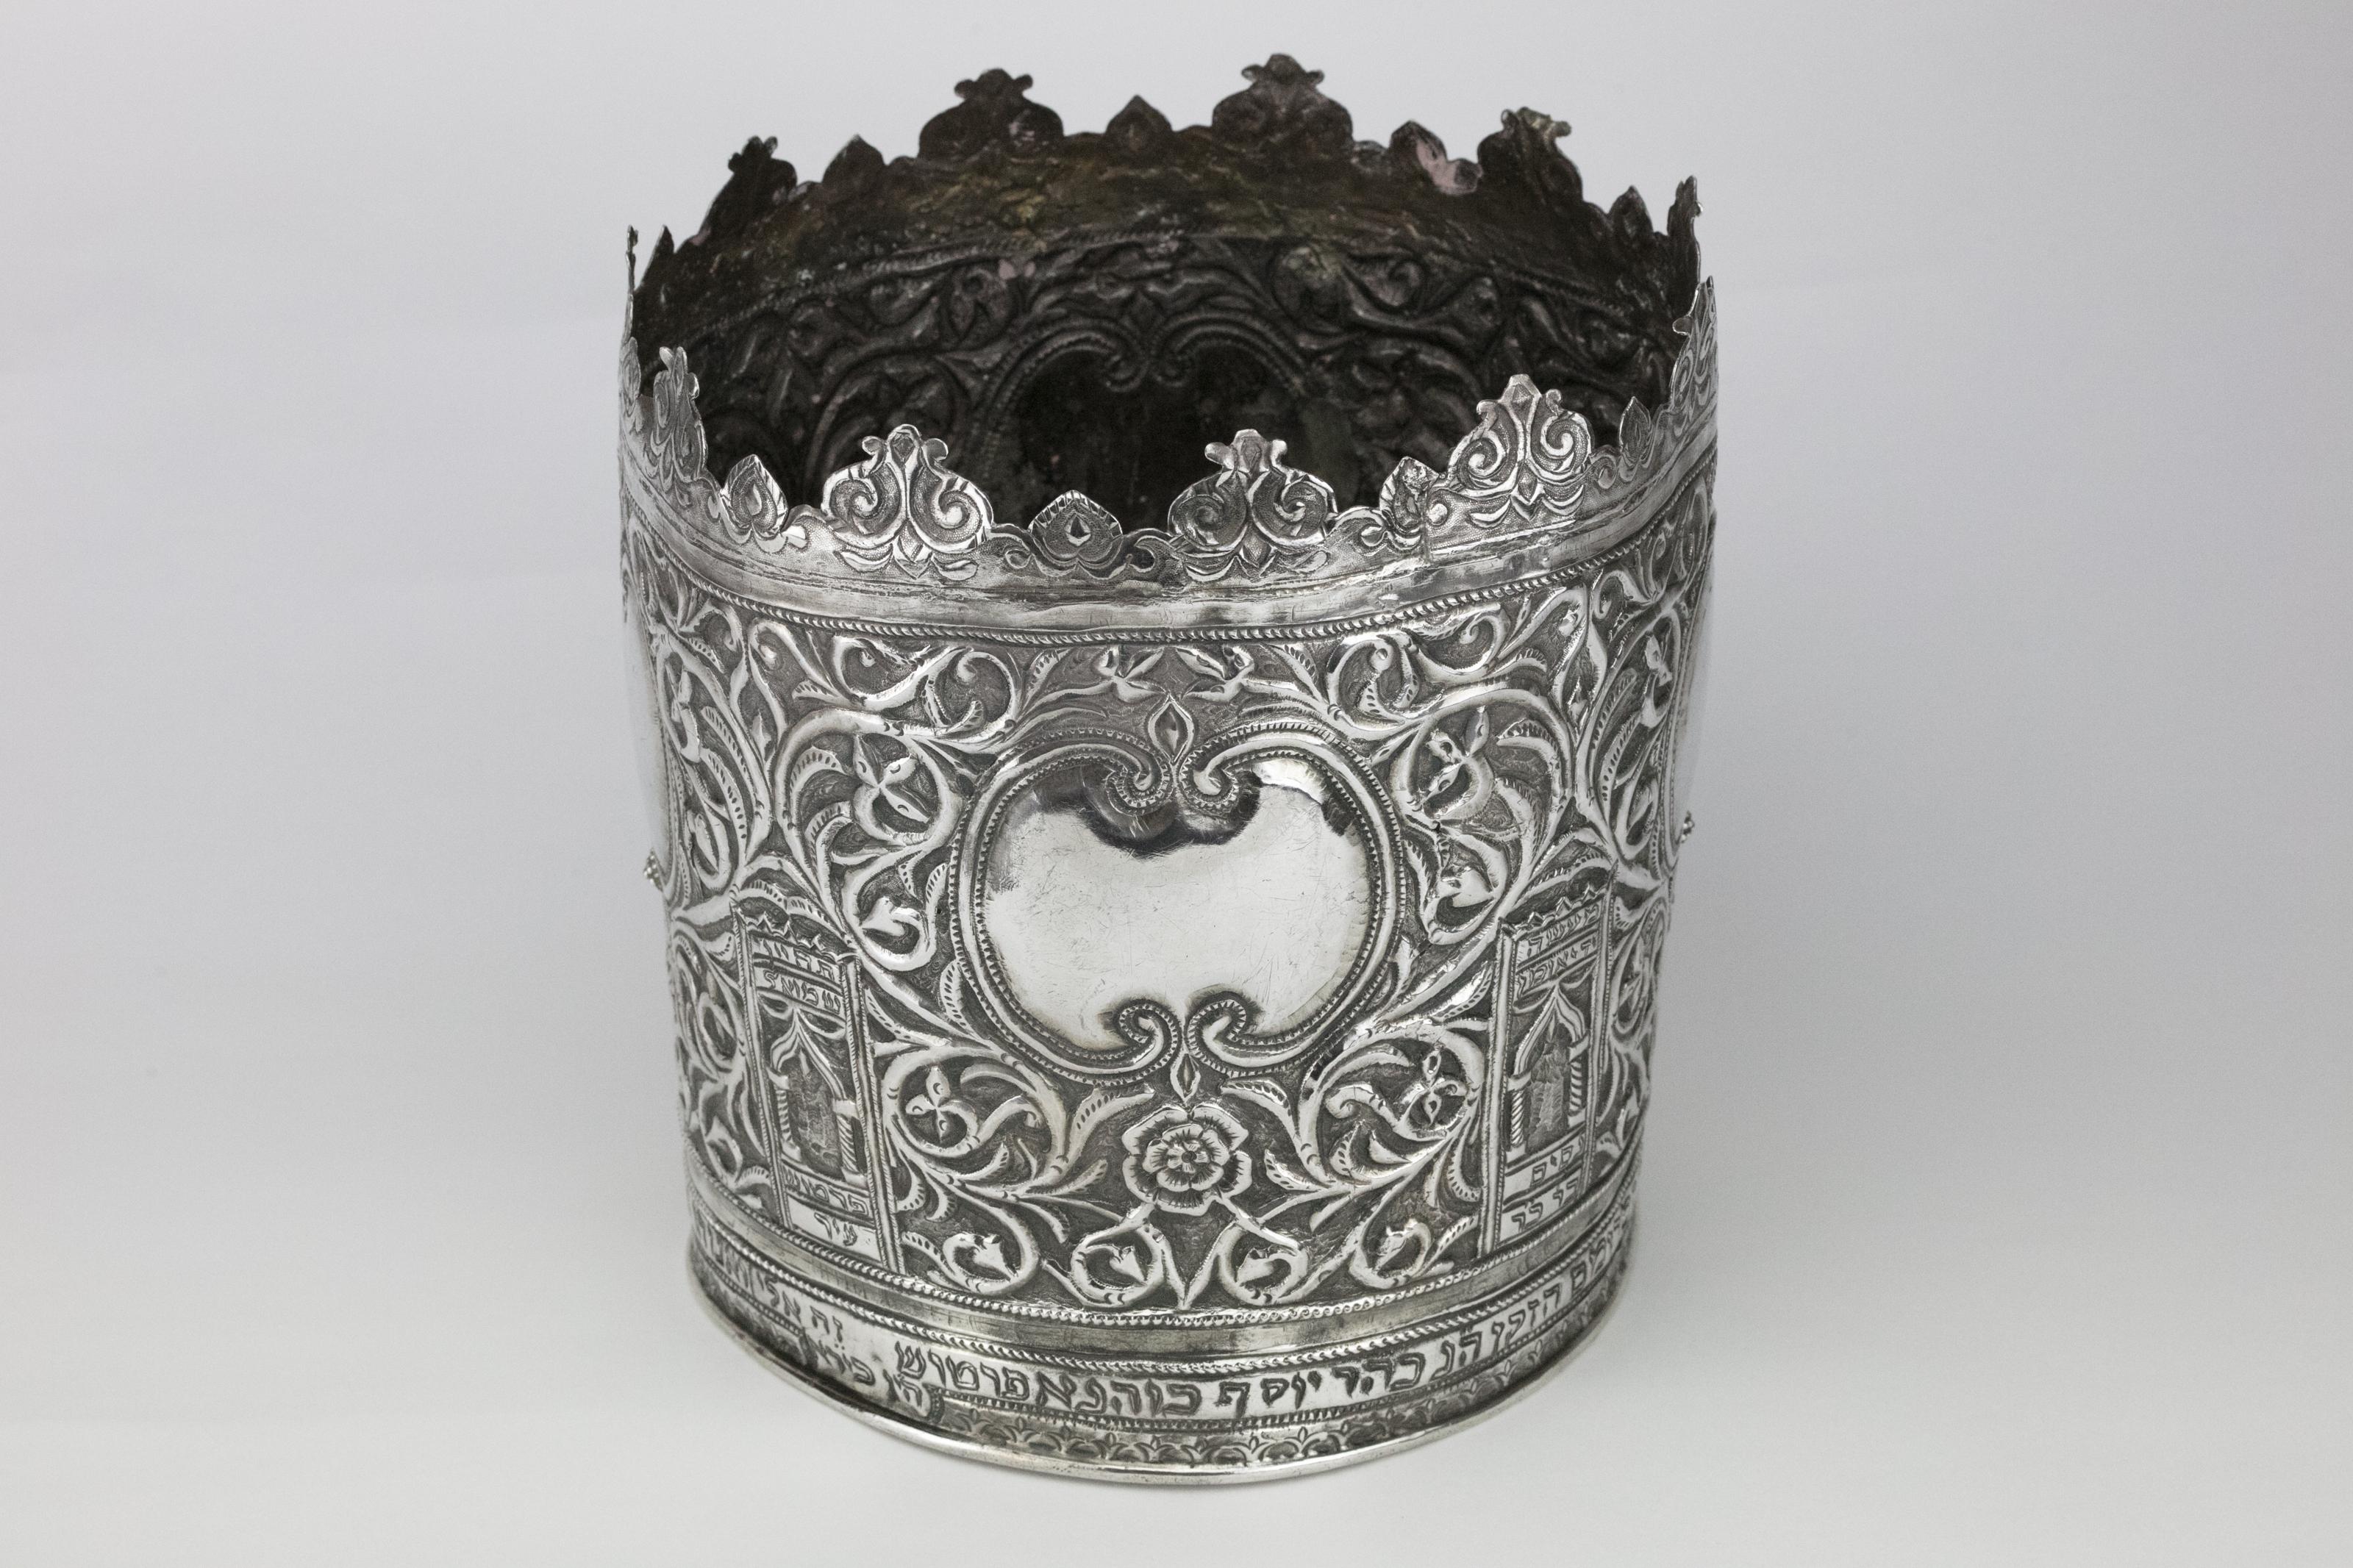 Large silver Torah crown, Probably Tunisia, 1922. 
Hand chased. Decorated with scrolling designs, arched pillars, reflective cartouches, flowers and organic design. 
The lower rim is engraved in Hebrew 